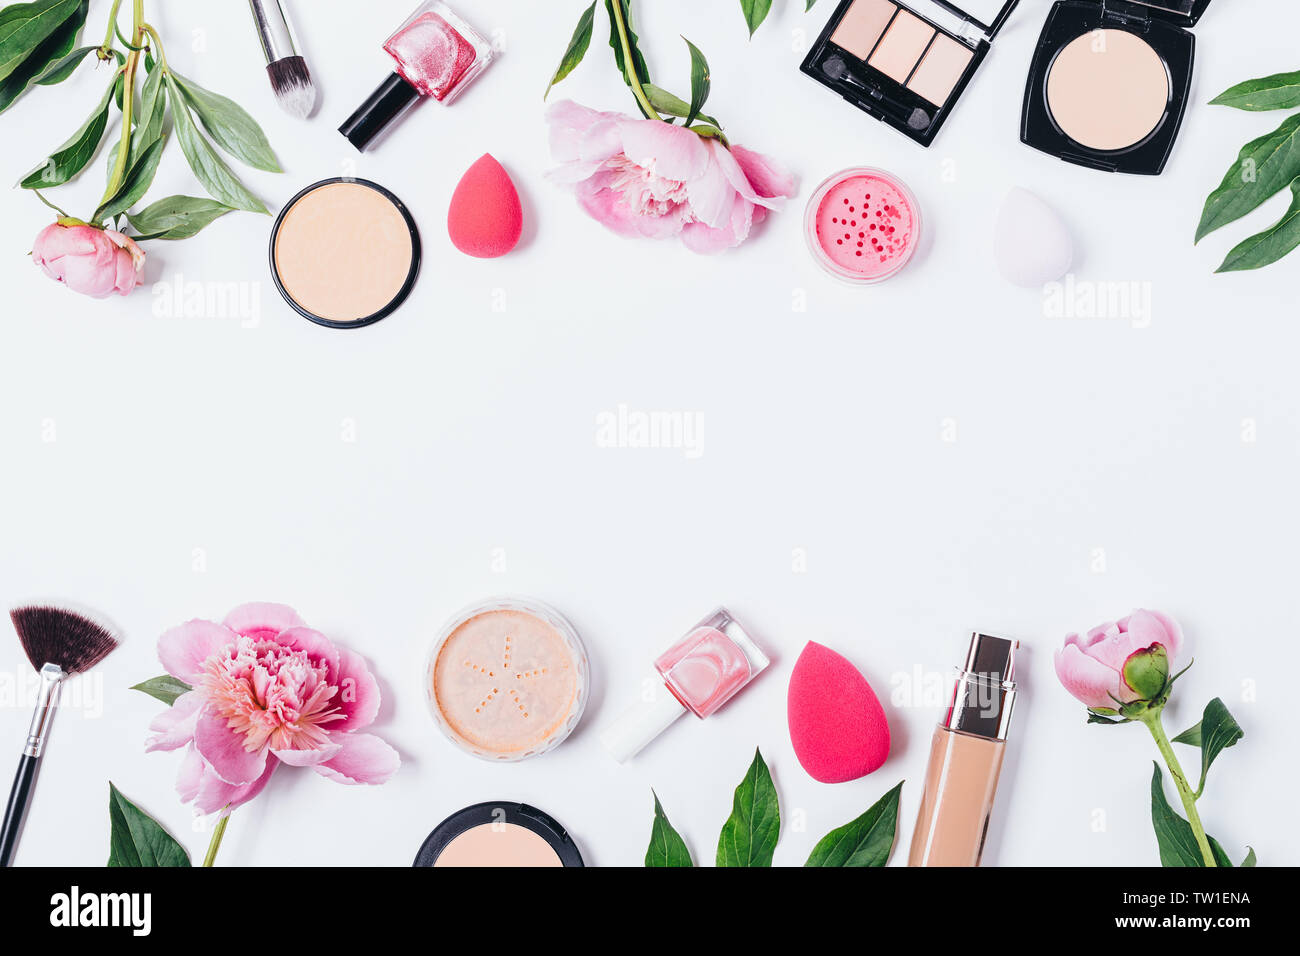 Floral makeup background of peonies next to cosmetic products and accessories on white table with an horizontal empty space in middle, flat lay. Stock Photo